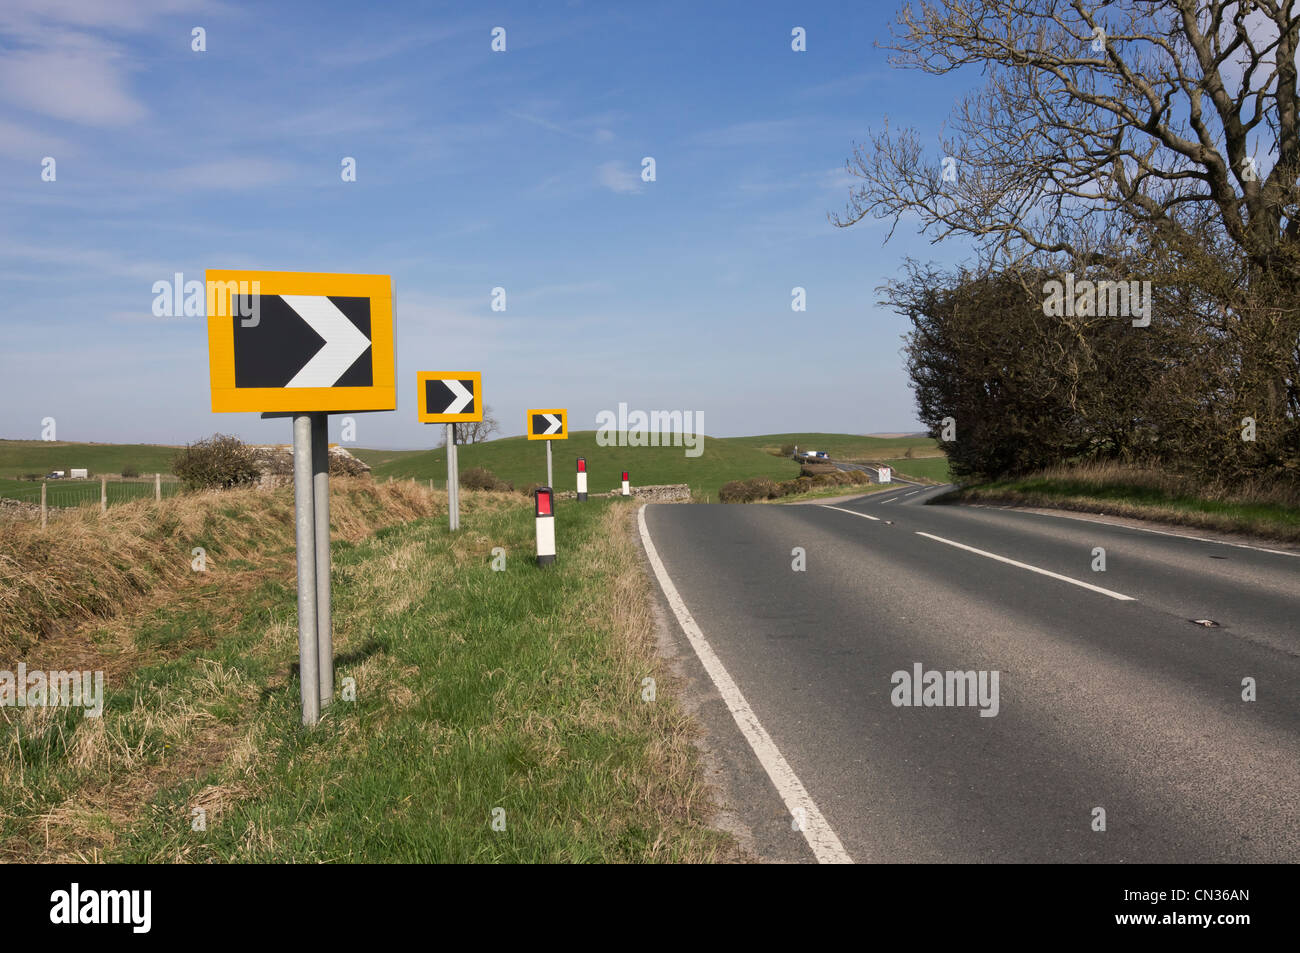 Warning signs on a country road in Yorkshire. Stock Photo